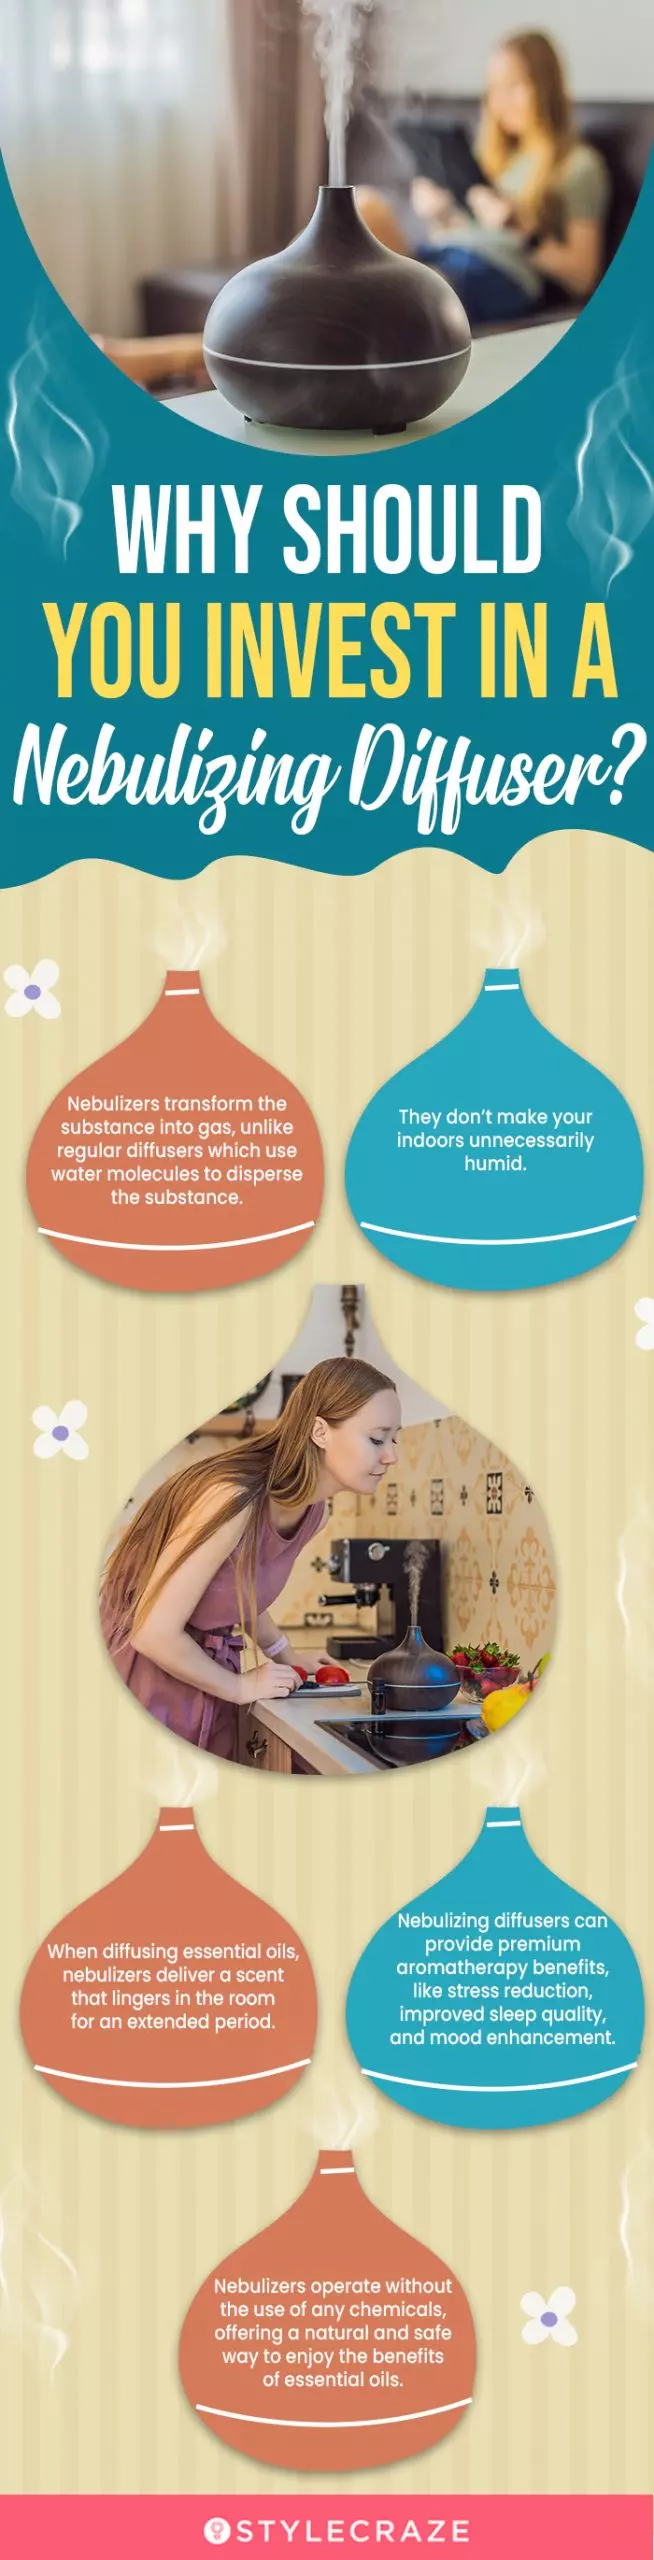 Why Should You Invest In A Nebulizing Diffuser? (infographic)